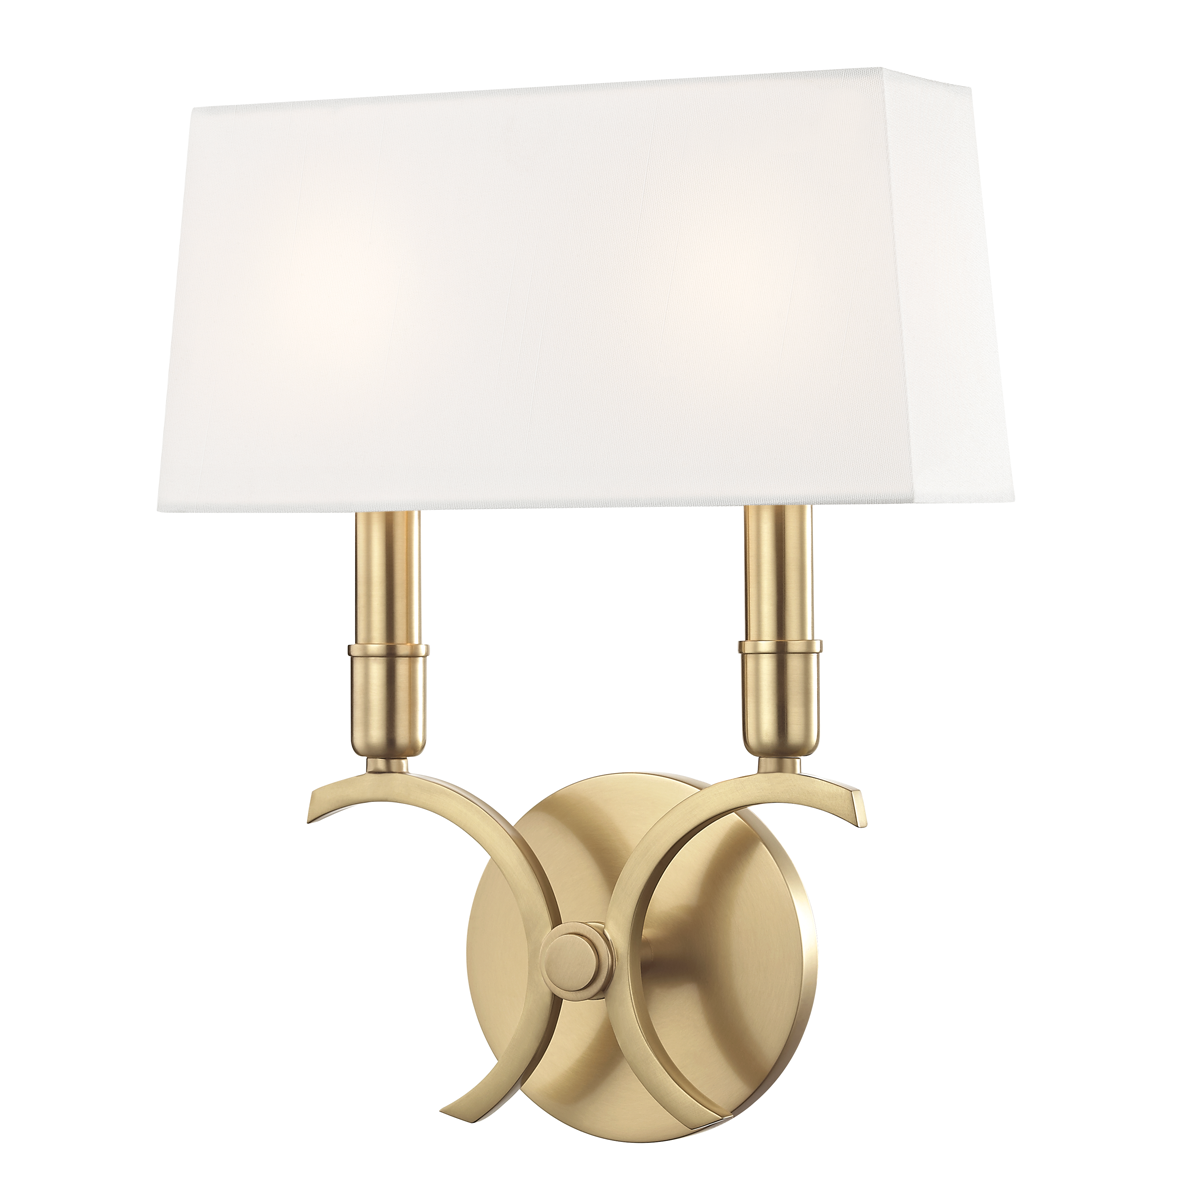 Gwen Wall Sconce - H212102S-AGB-CE - Mitzi - Luxury Lighting Boutique